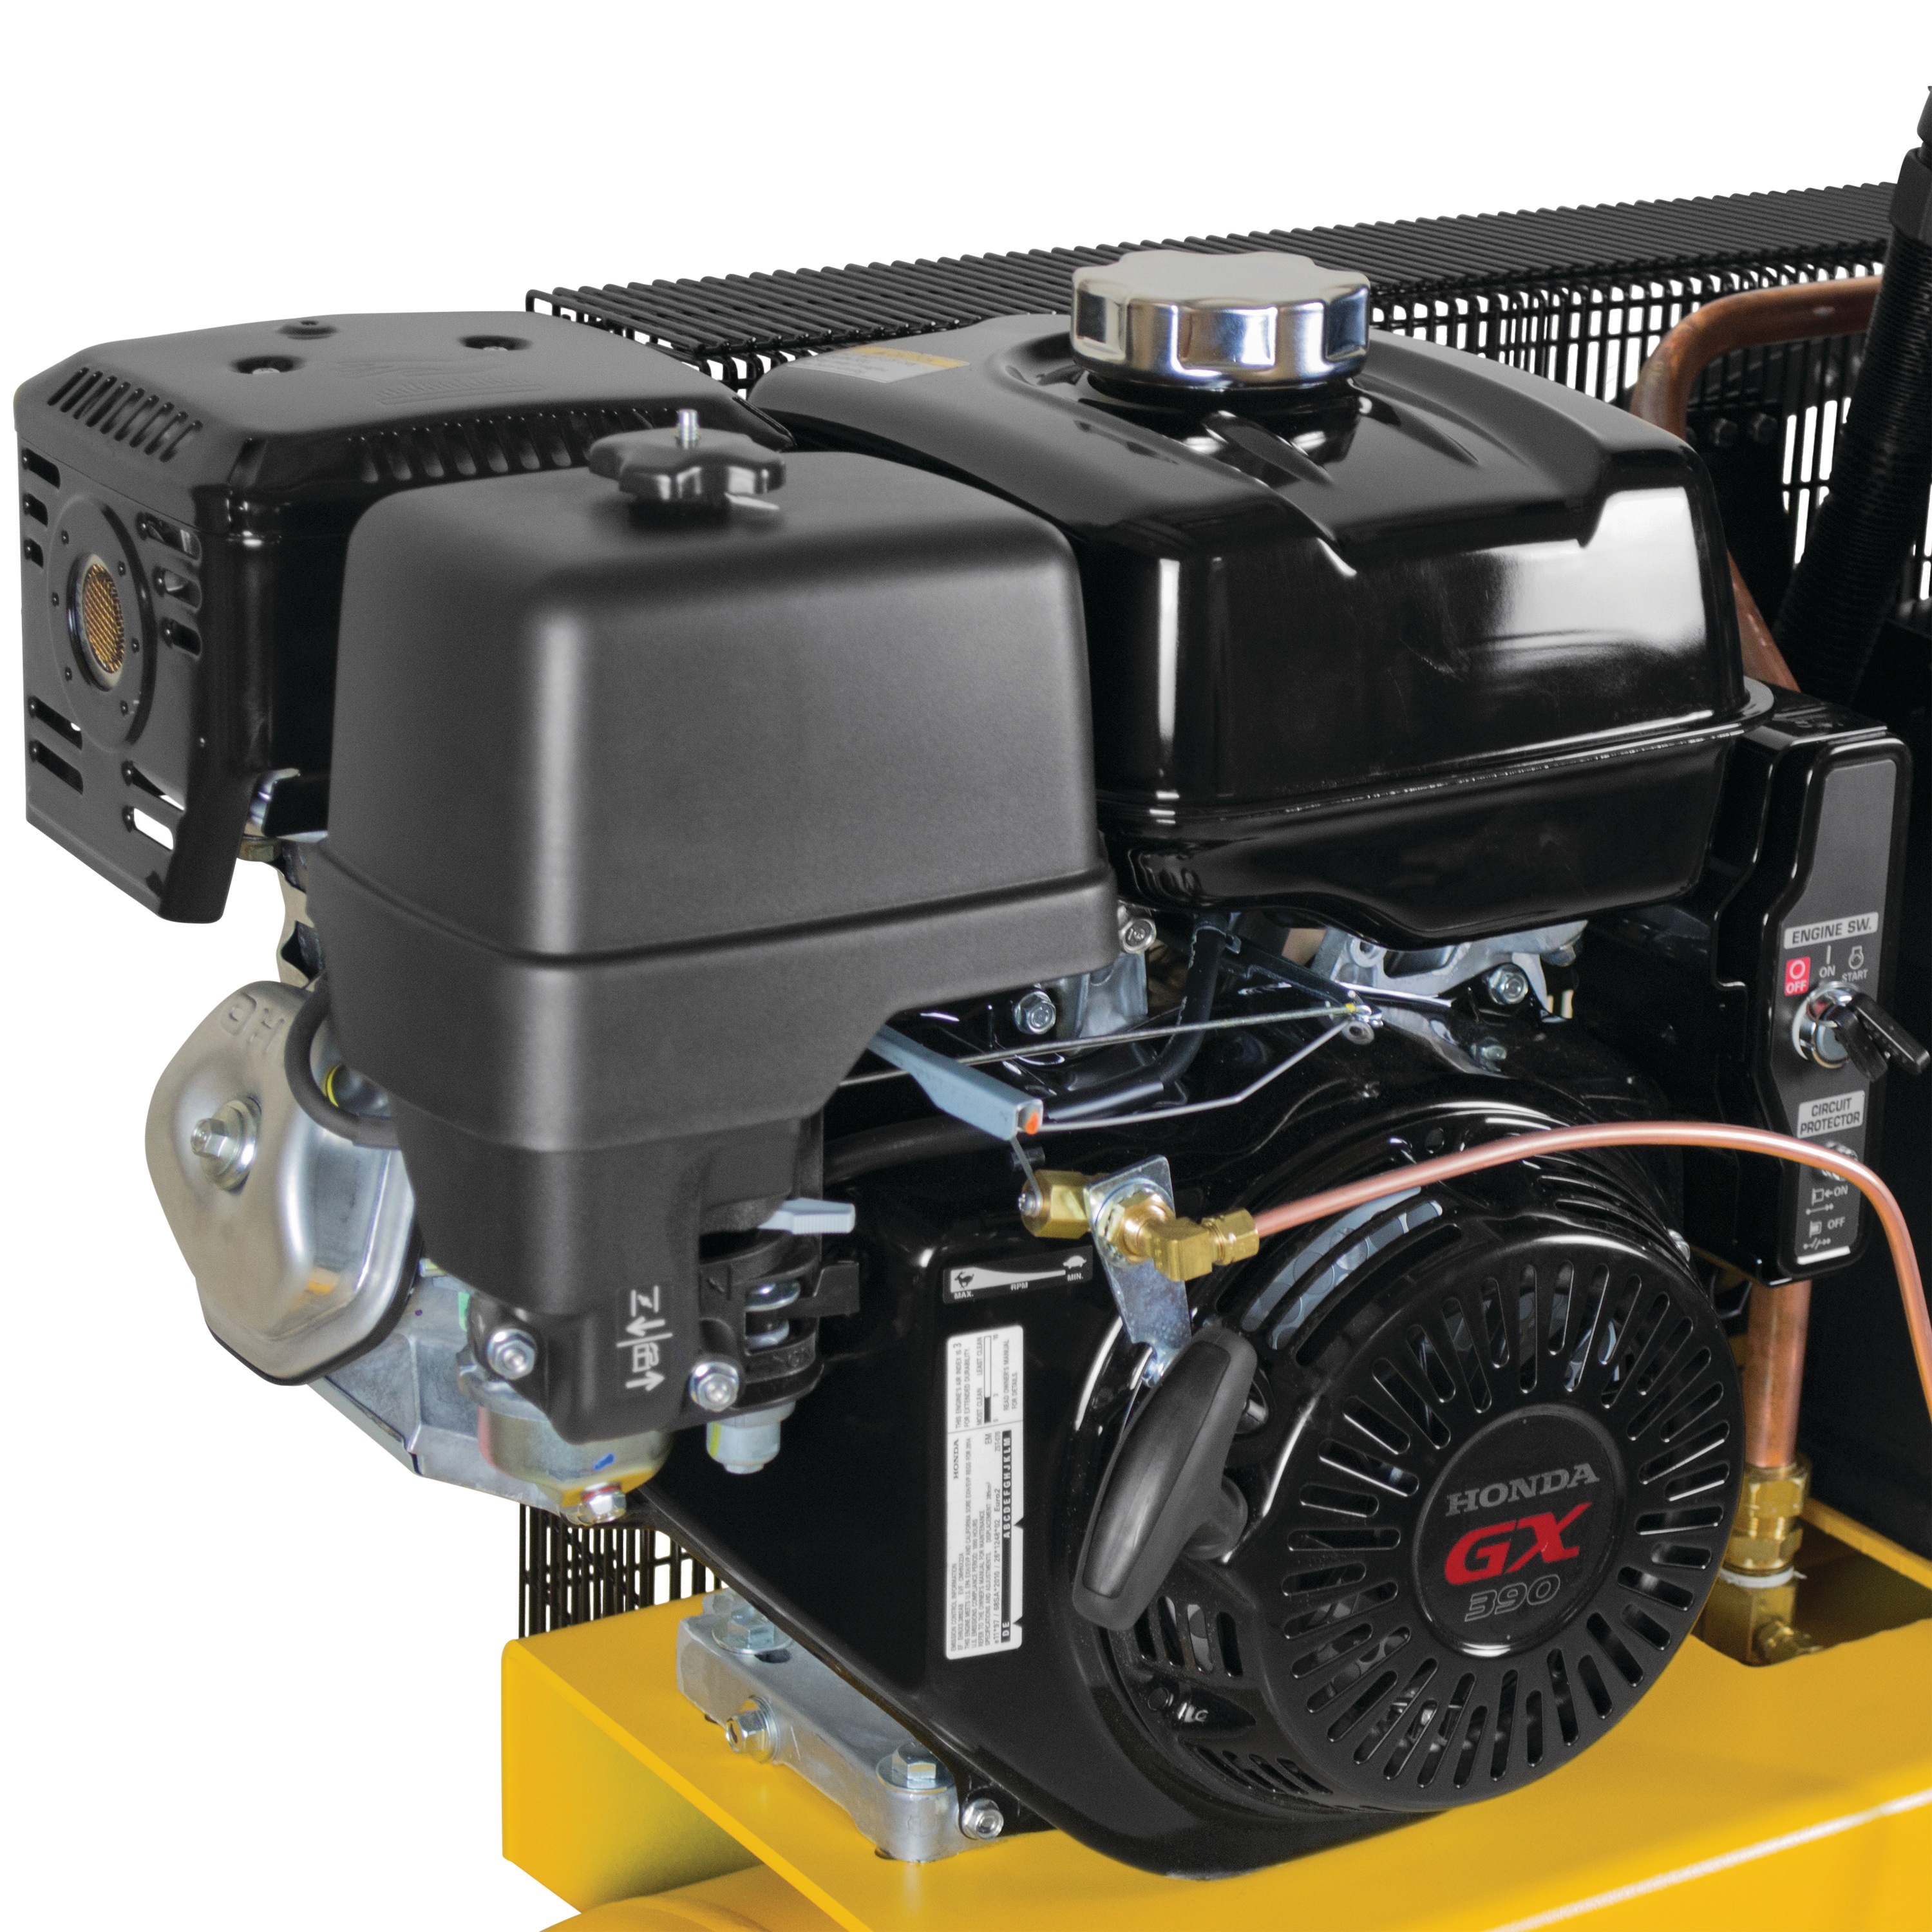 Petrol Engine feature of 30 Gallon 2 stage portable gas powered truck mount air compressor.
